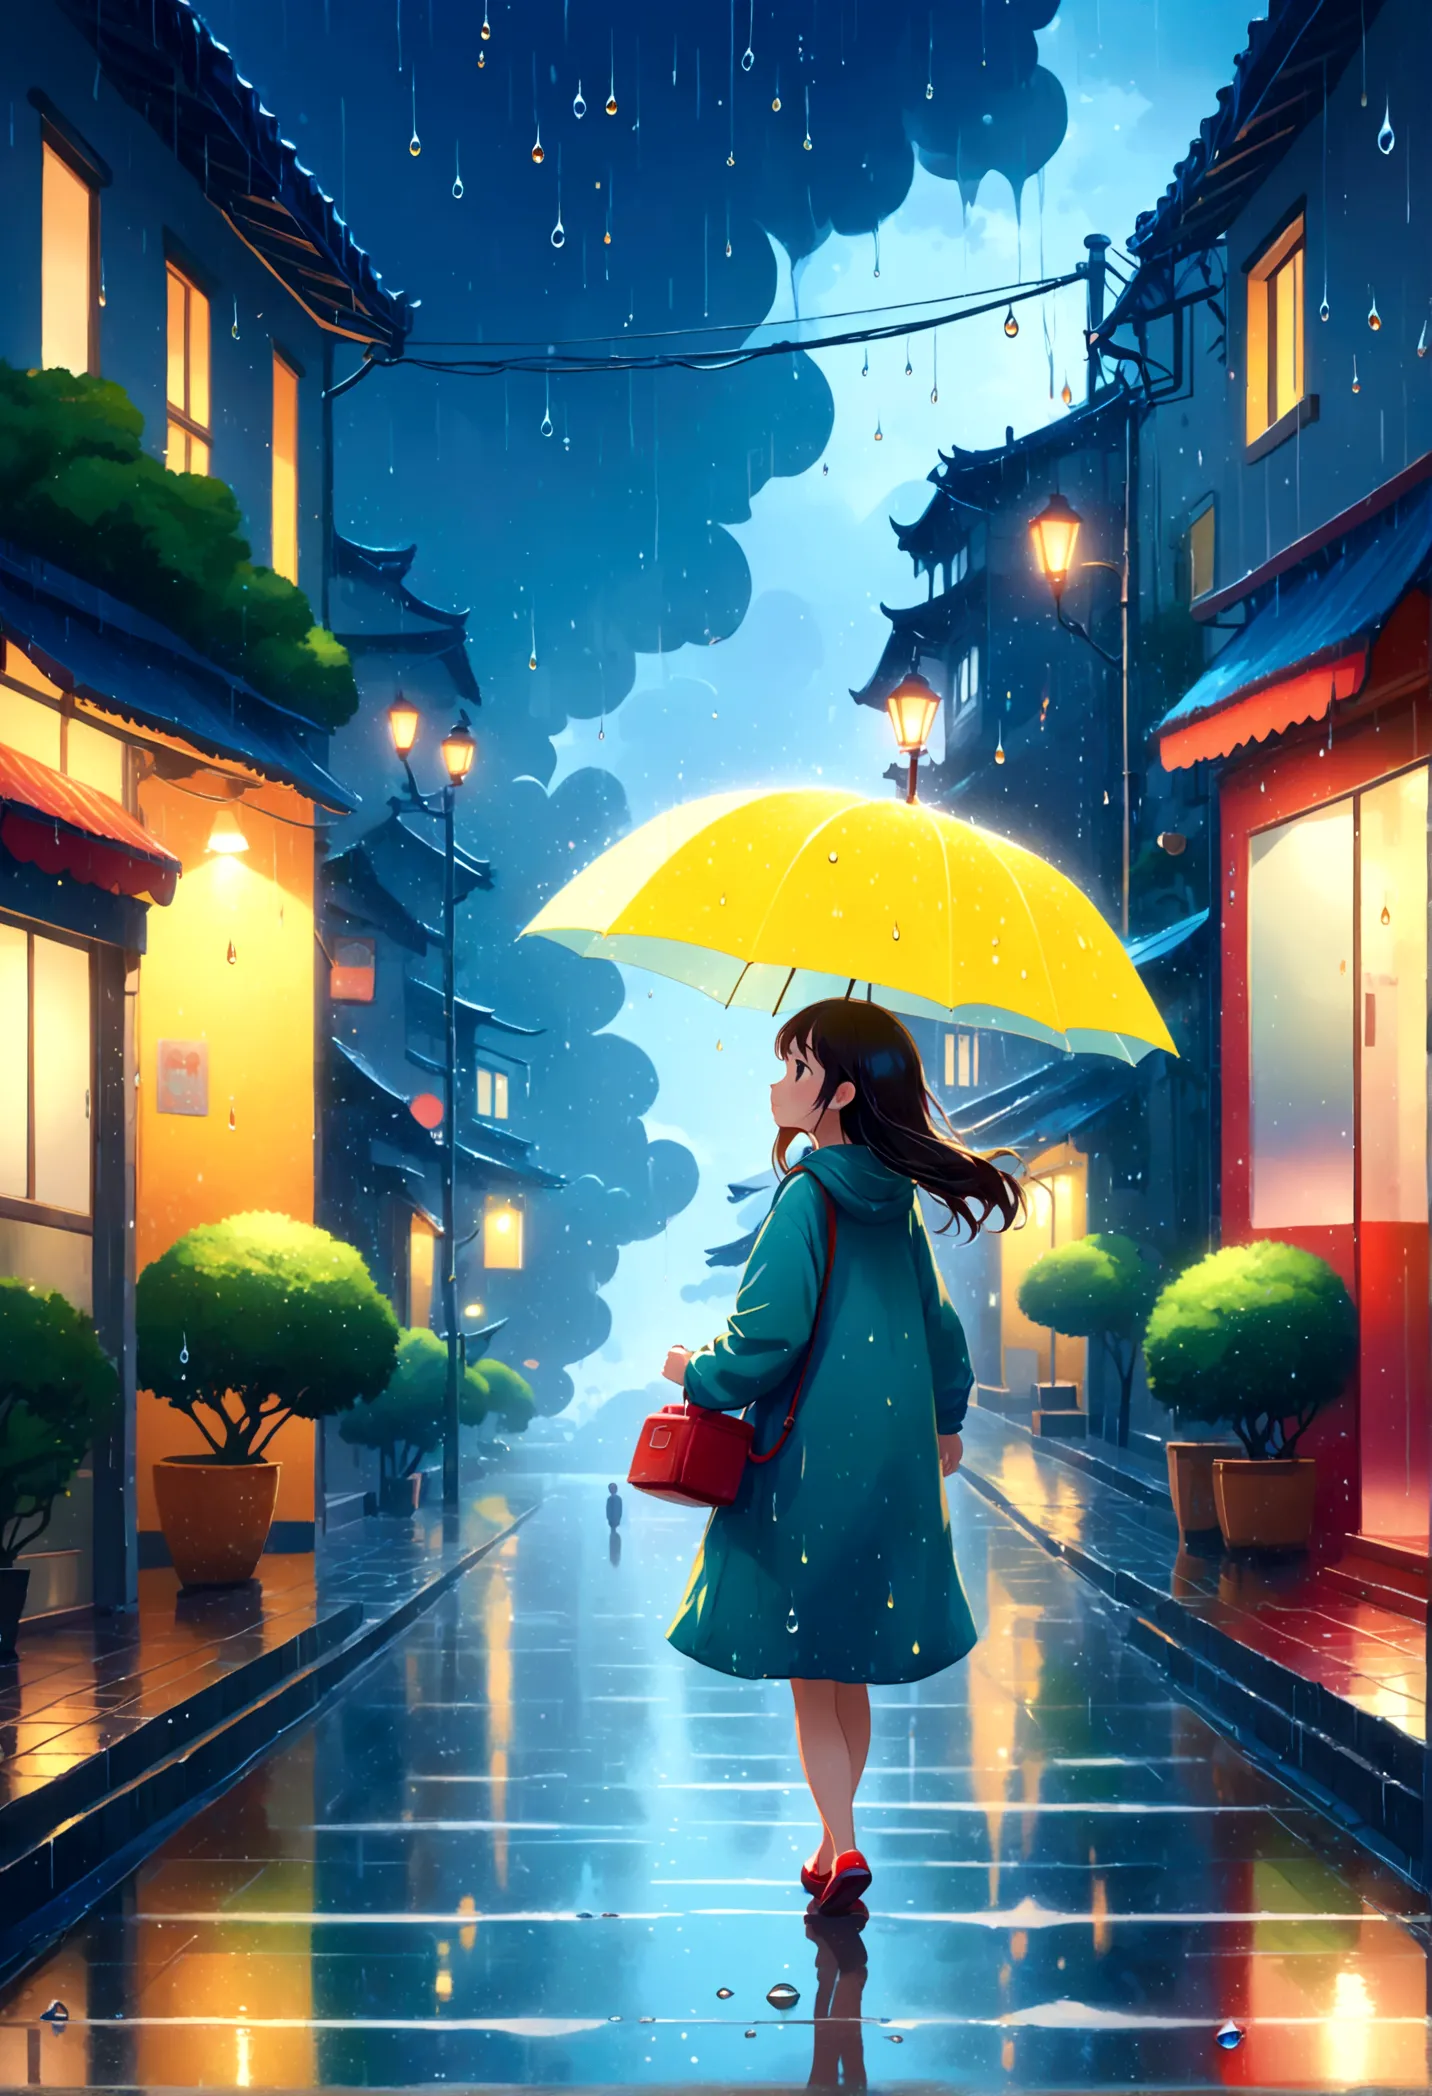 cuteイラスト: landscape,Street corner on a rainy day,絵本に出てくるようなlandscape,Emotional,Girl is walking,break,(Girl with an 傘),Anatomical...